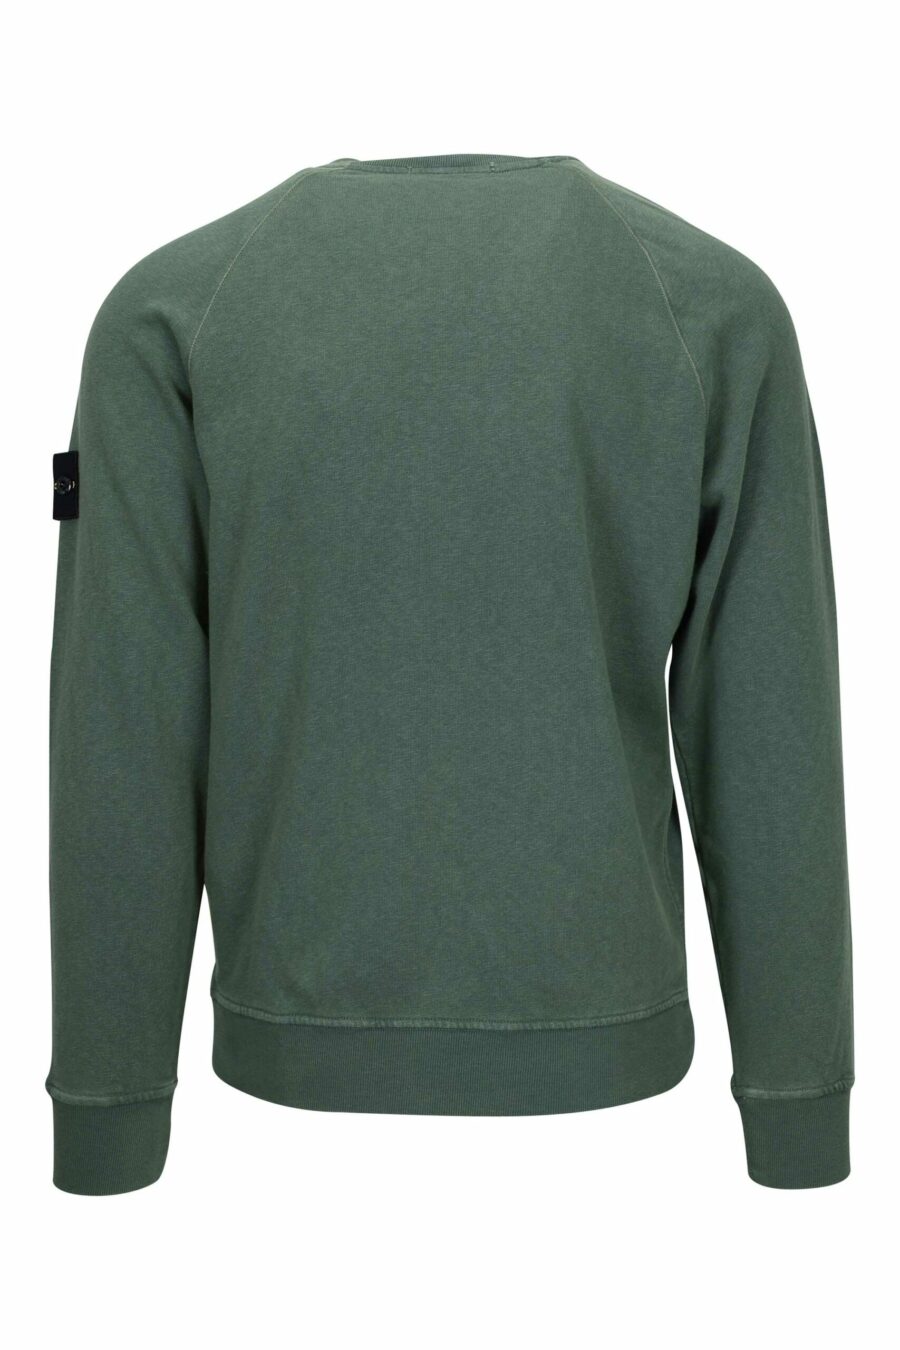 Military green sweatshirt with logo compass patch - 8052572906923 1 scaled